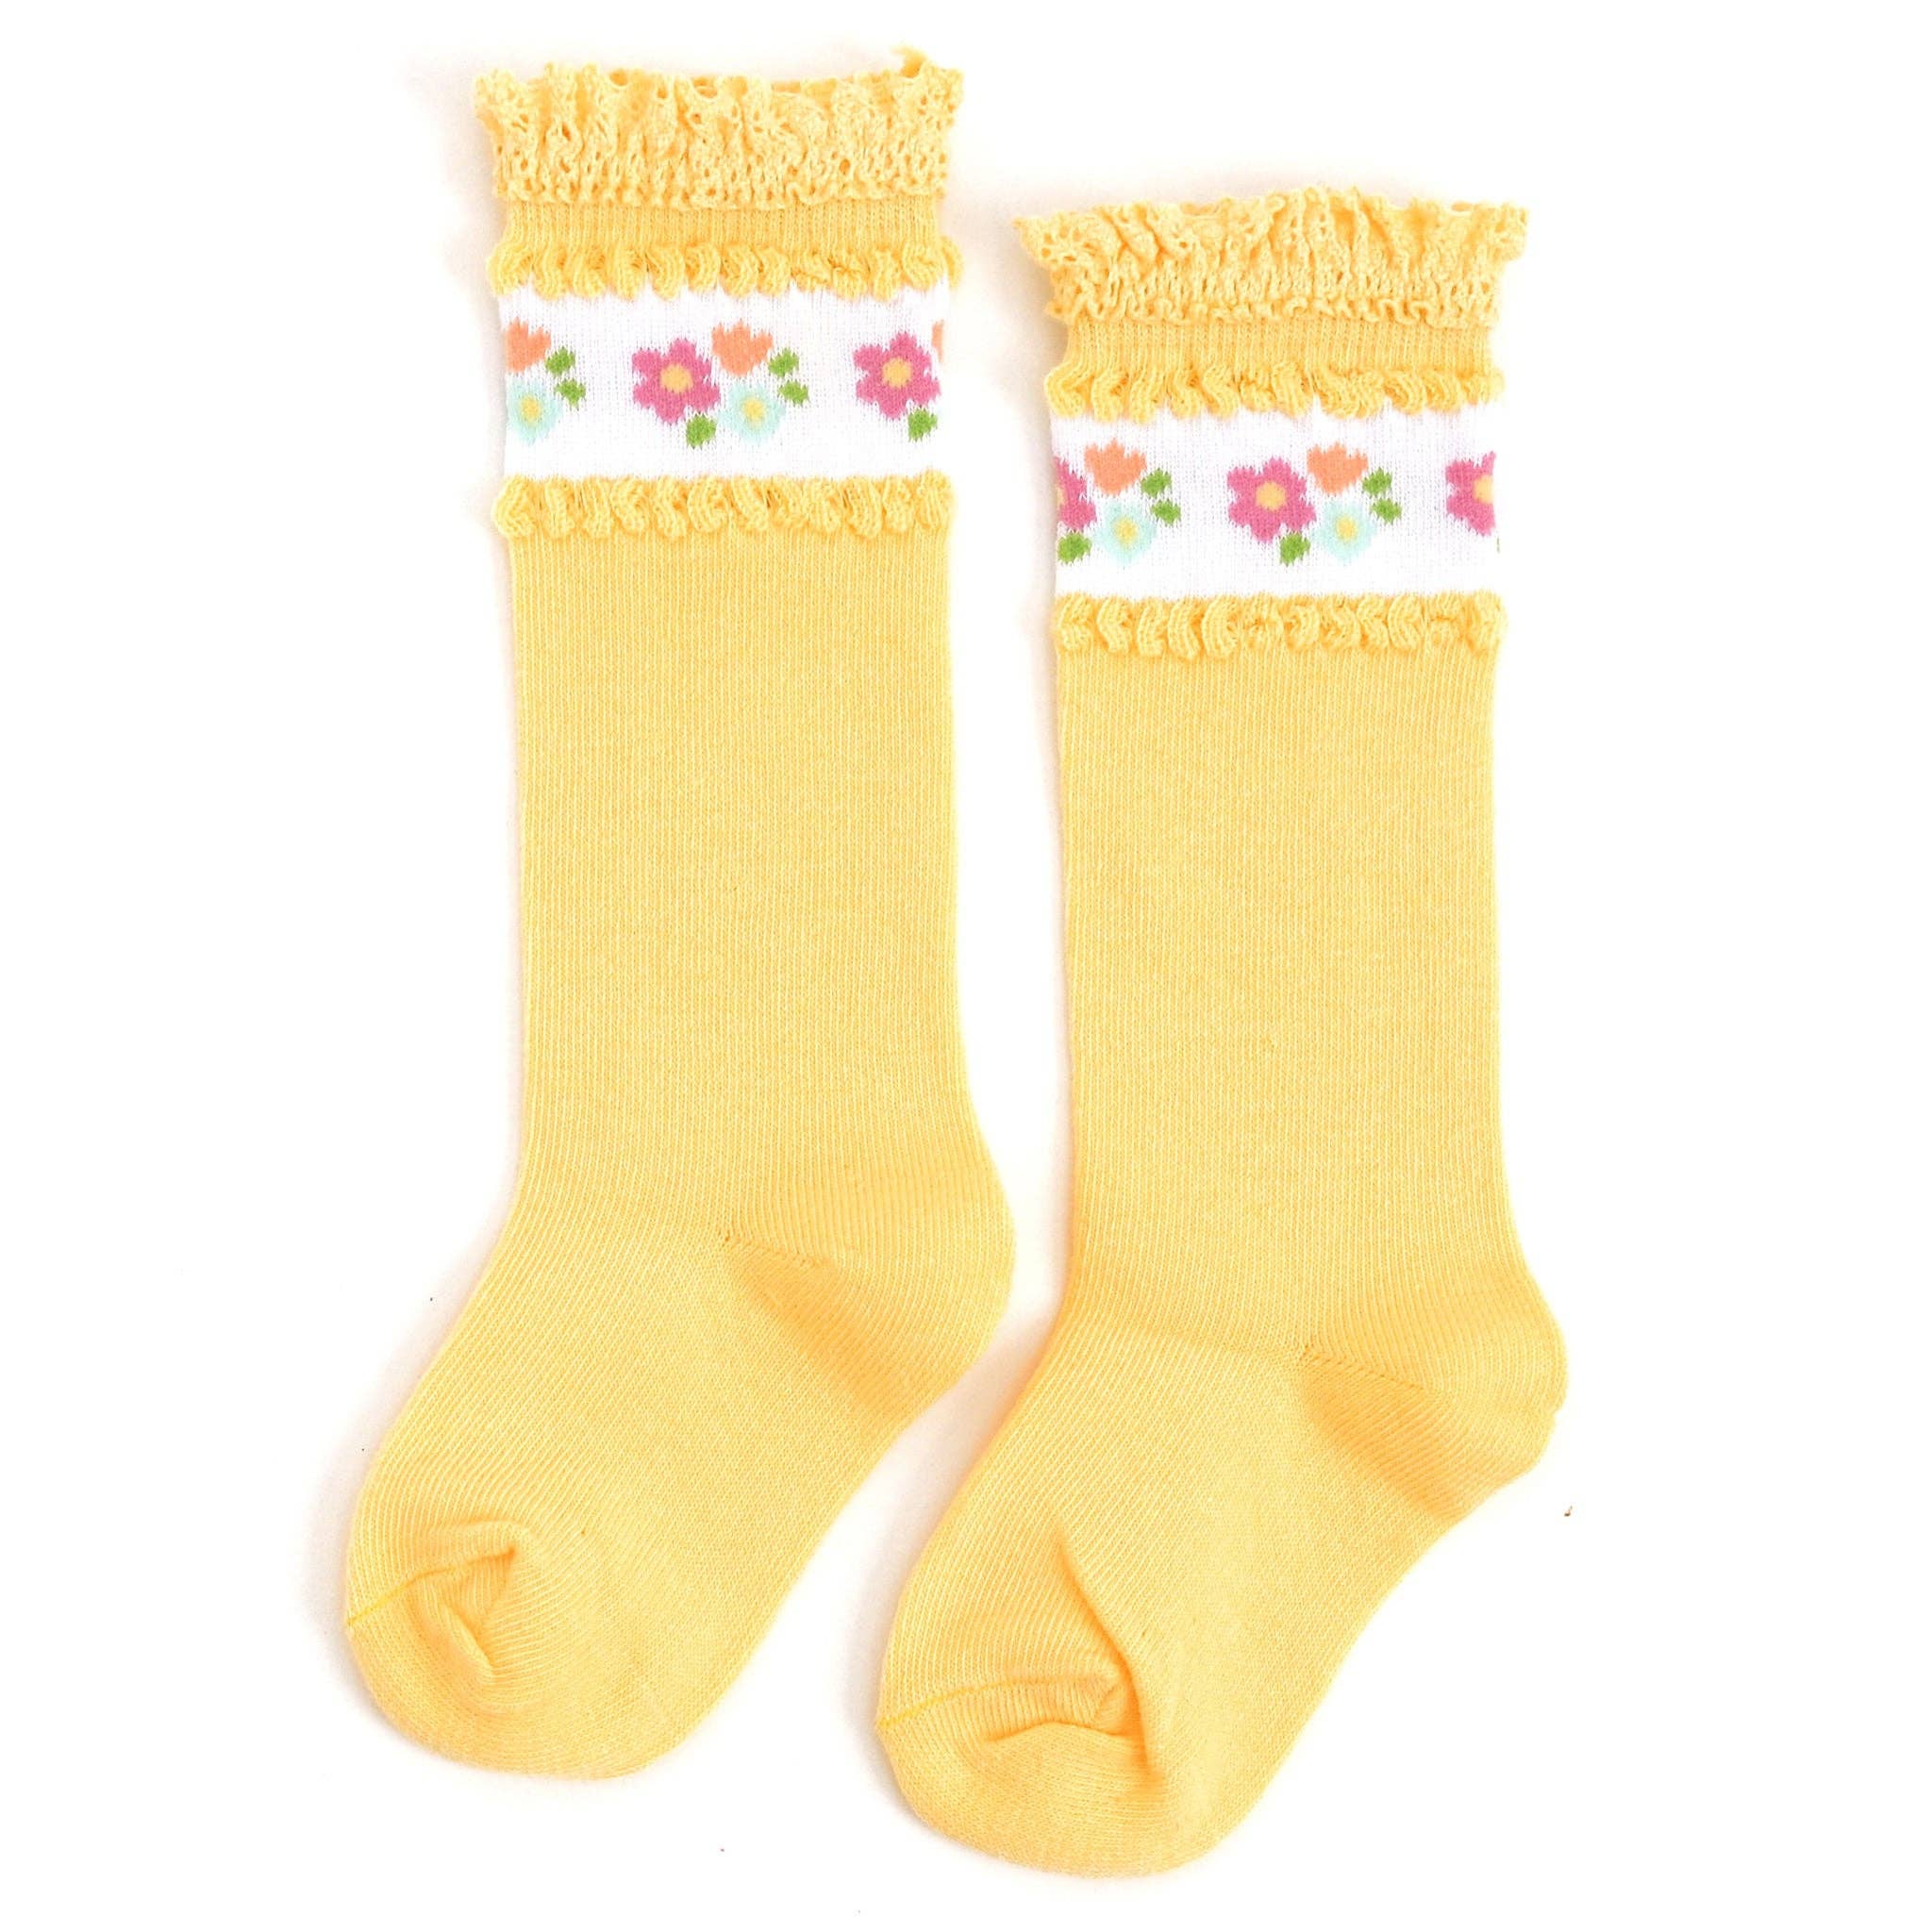 White Cable Knit Knee High Socks for baby, toddler and girls. – Little  Stocking Company